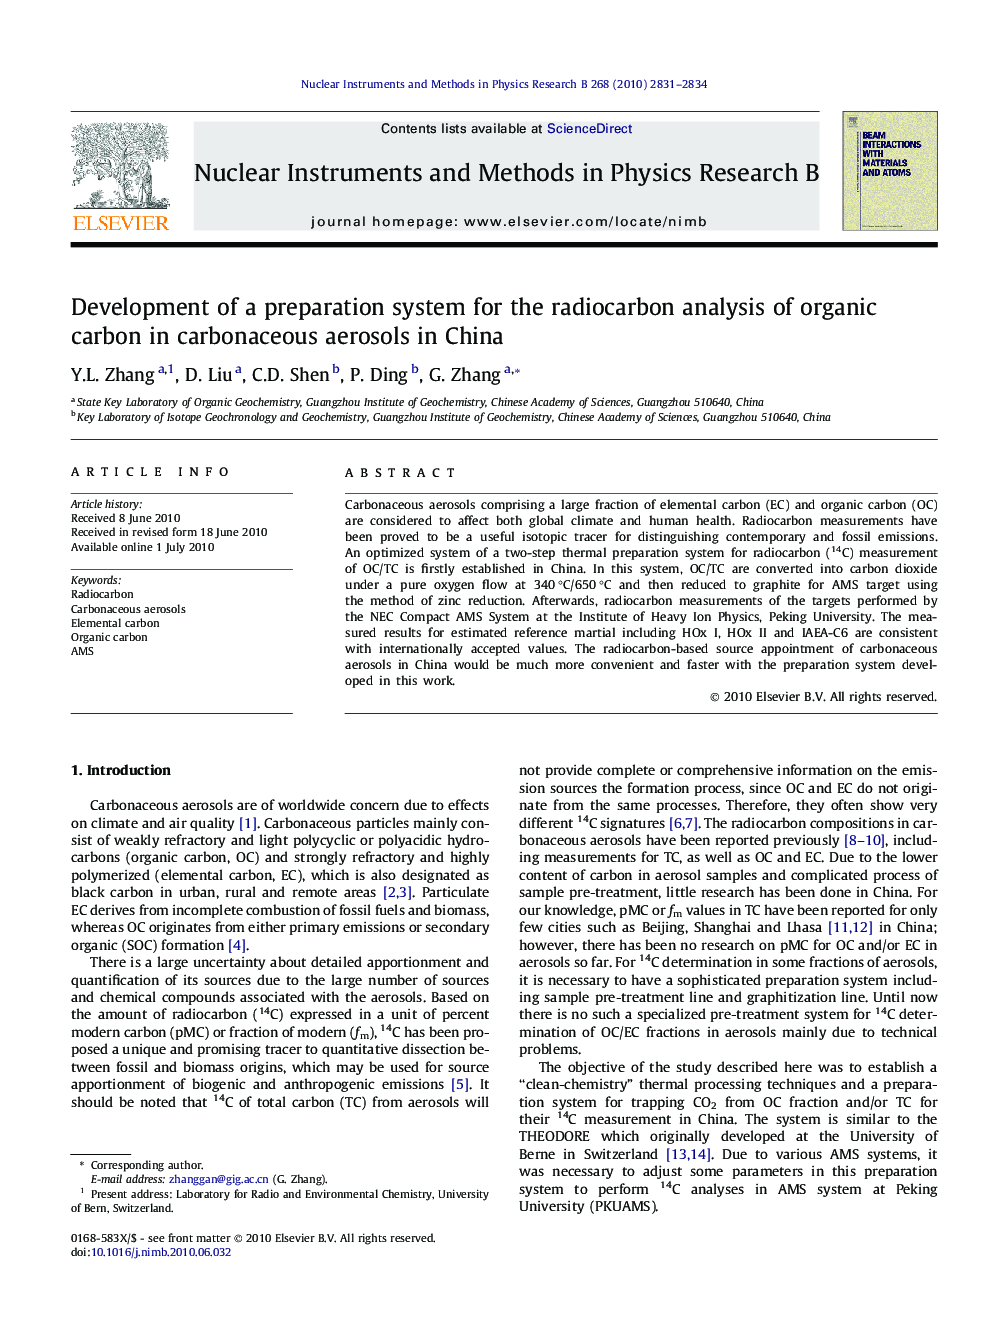 Development of a preparation system for the radiocarbon analysis of organic carbon in carbonaceous aerosols in China